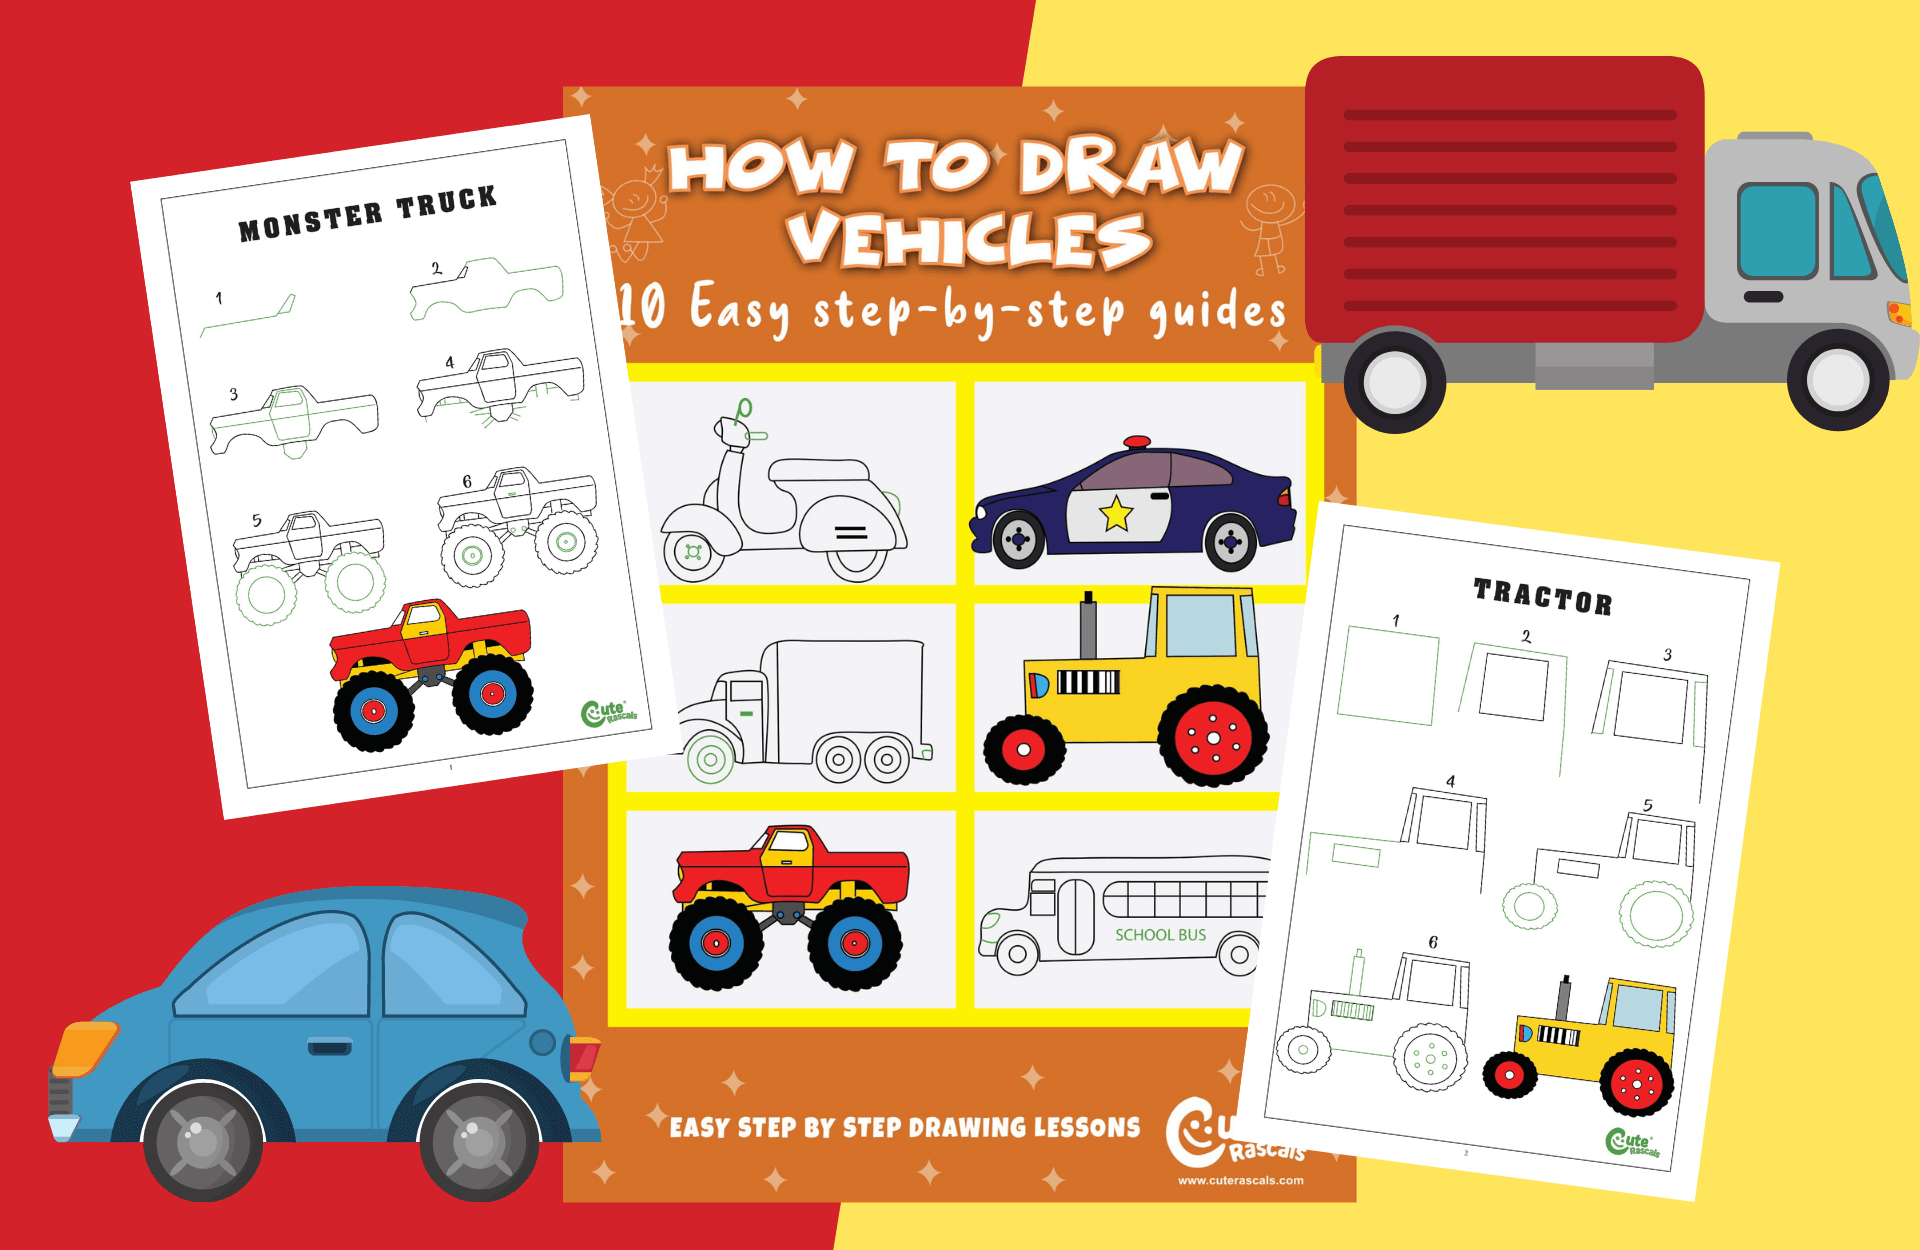 Vehicles Drawing Tutorials - How to draw Vehicles step by step